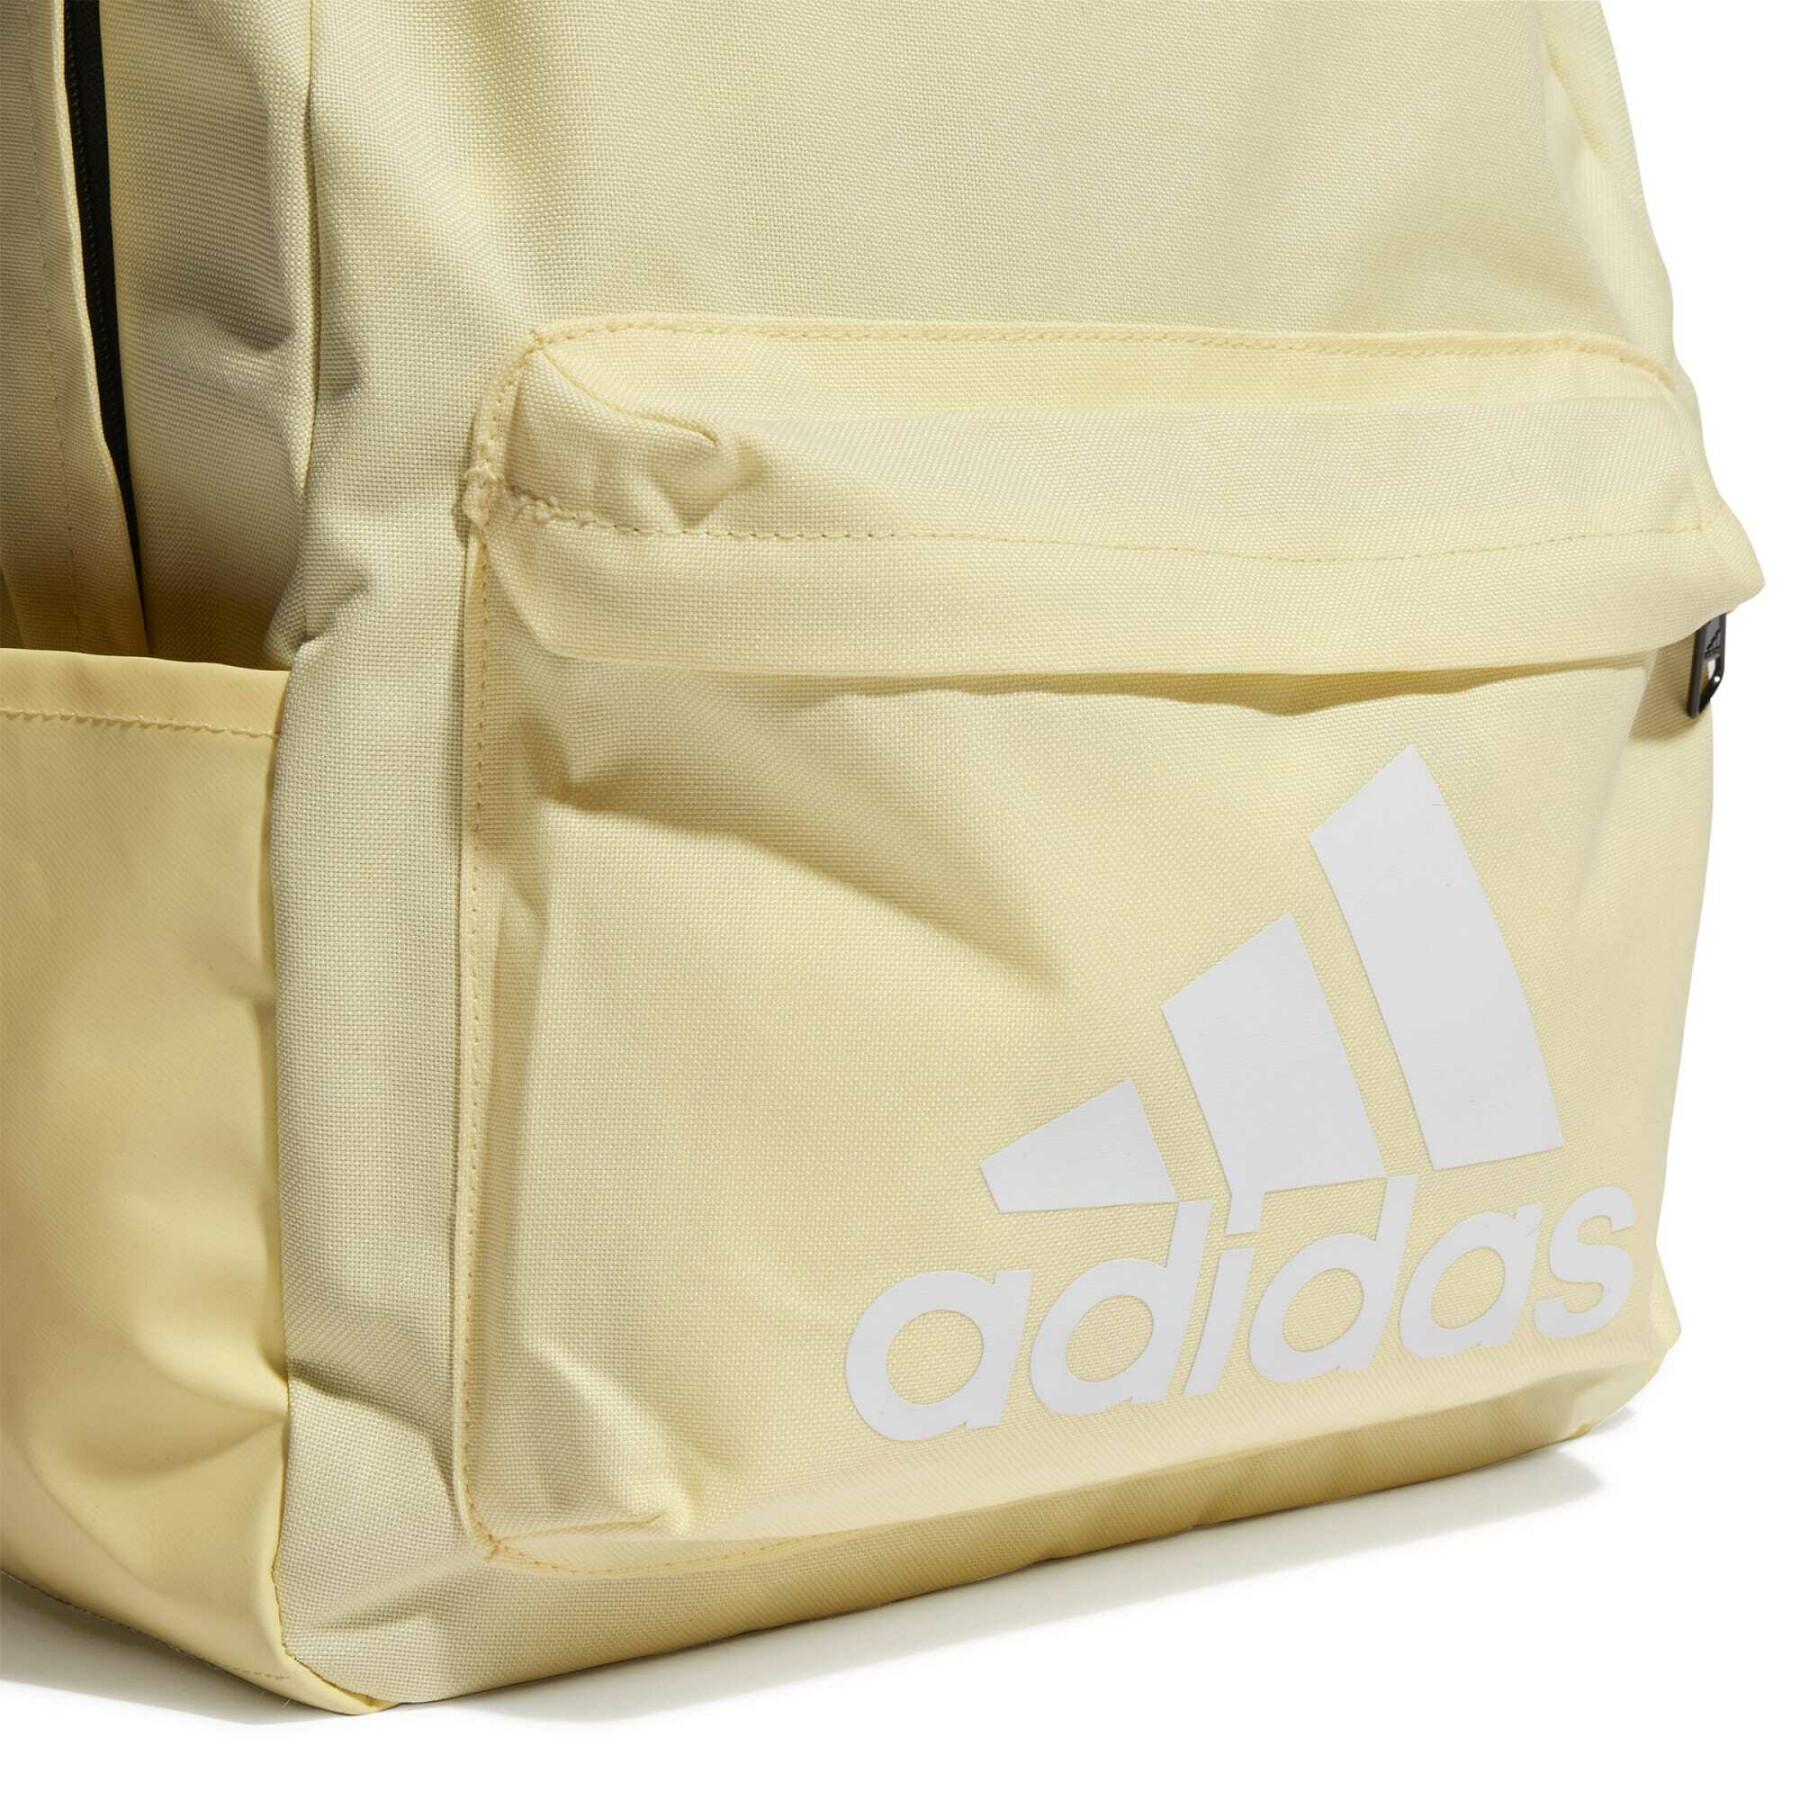 Sports backpack with classic badge adidas